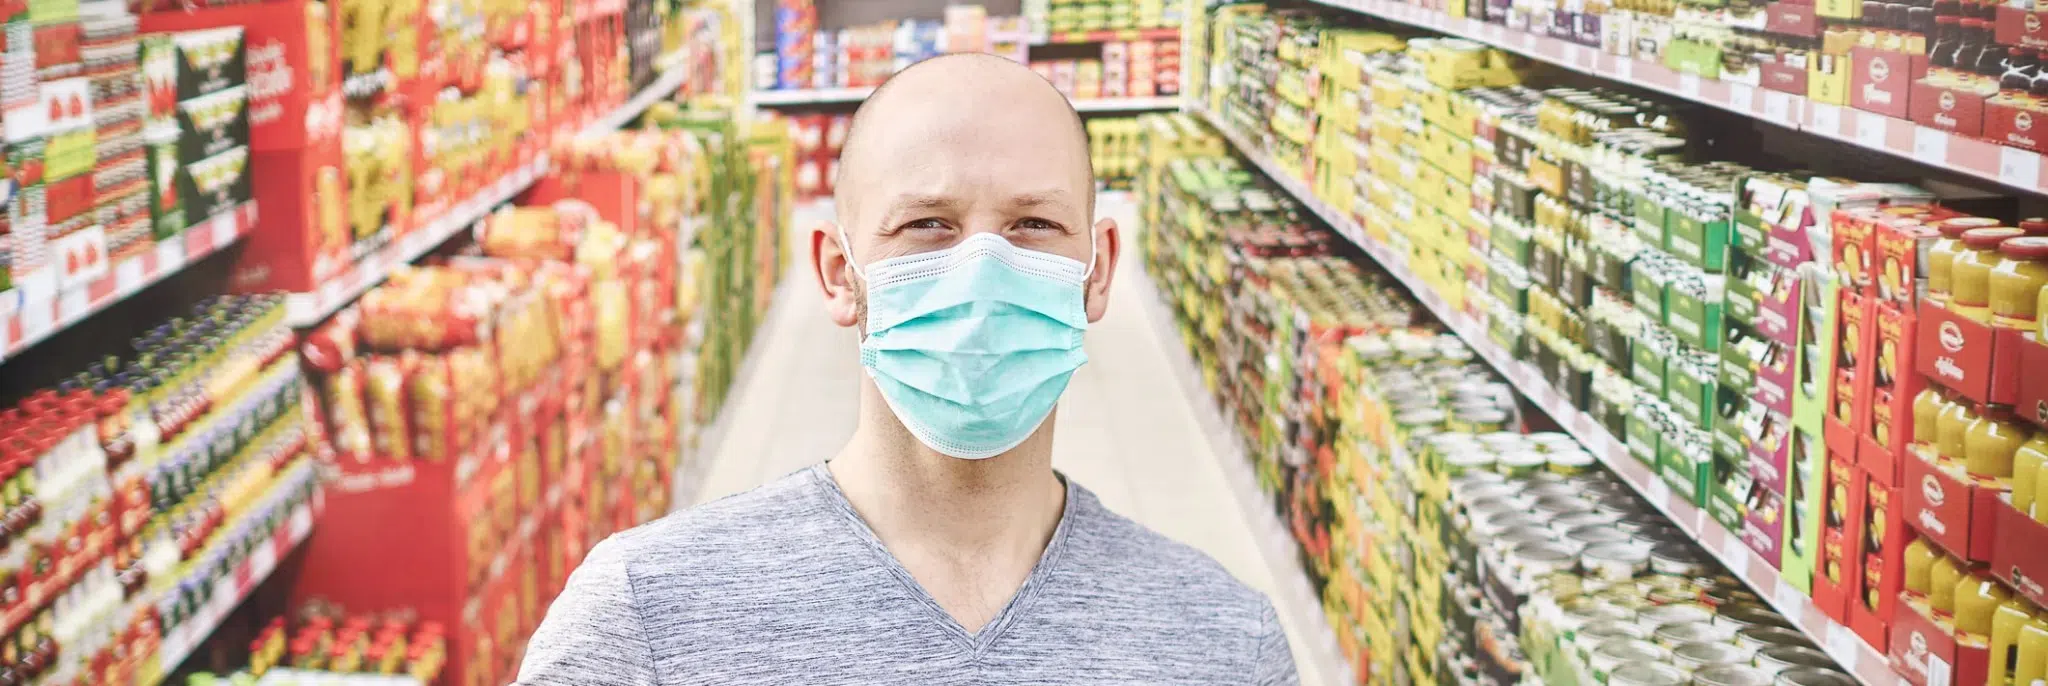 Man in grocery store with face mask on